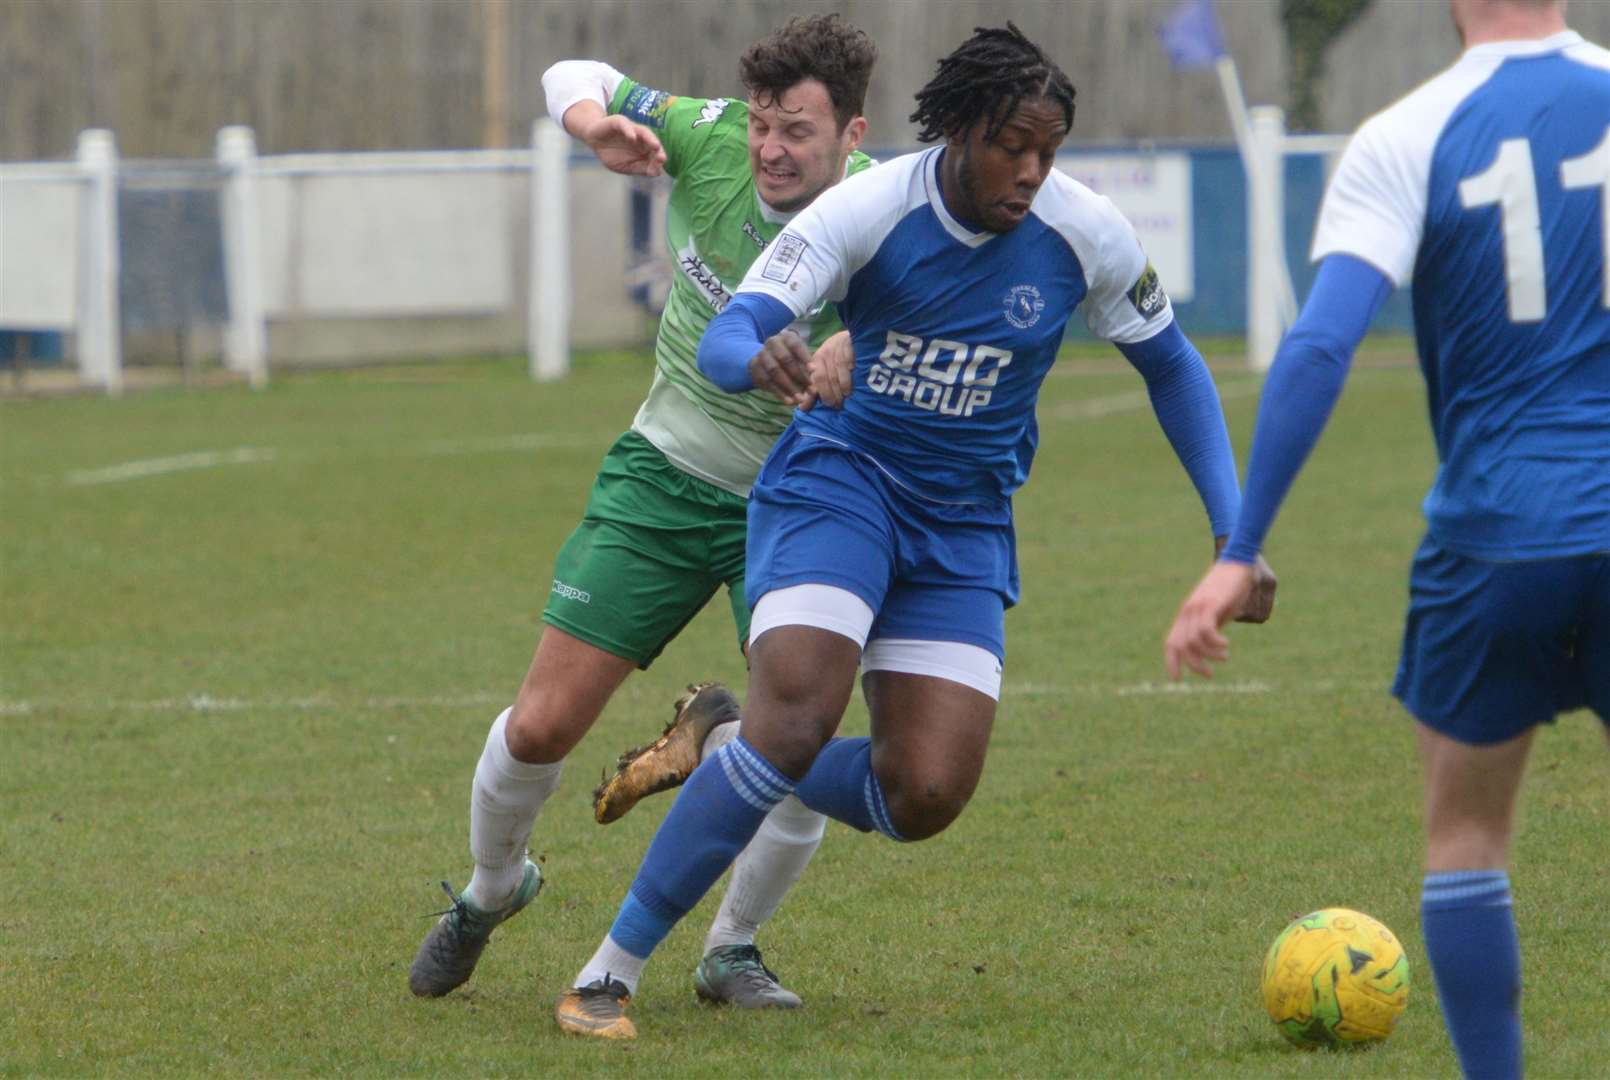 Herne Bay taking on Guernsey in Bostik South East at Winch's Field earlier this month. Picture: Chris Davey